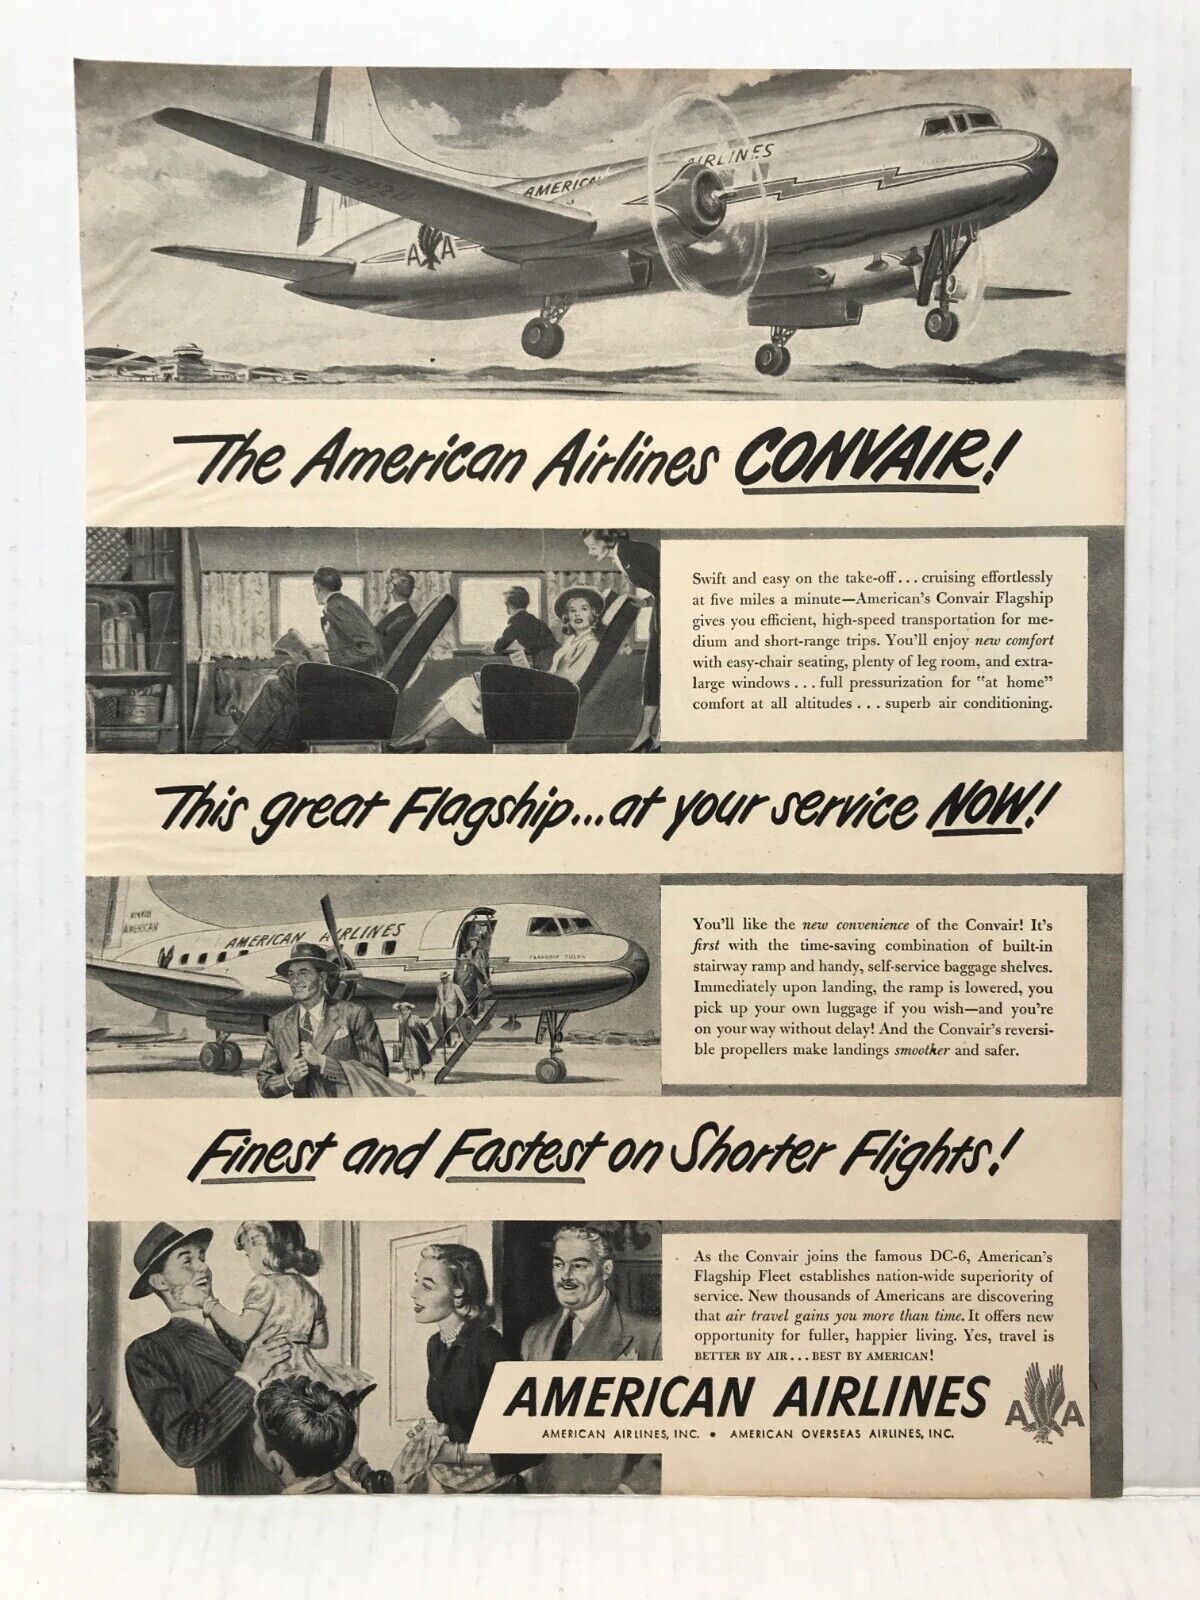 1948 American Airlines Convair Great Flagship VINTAGE PRINT AD LM48